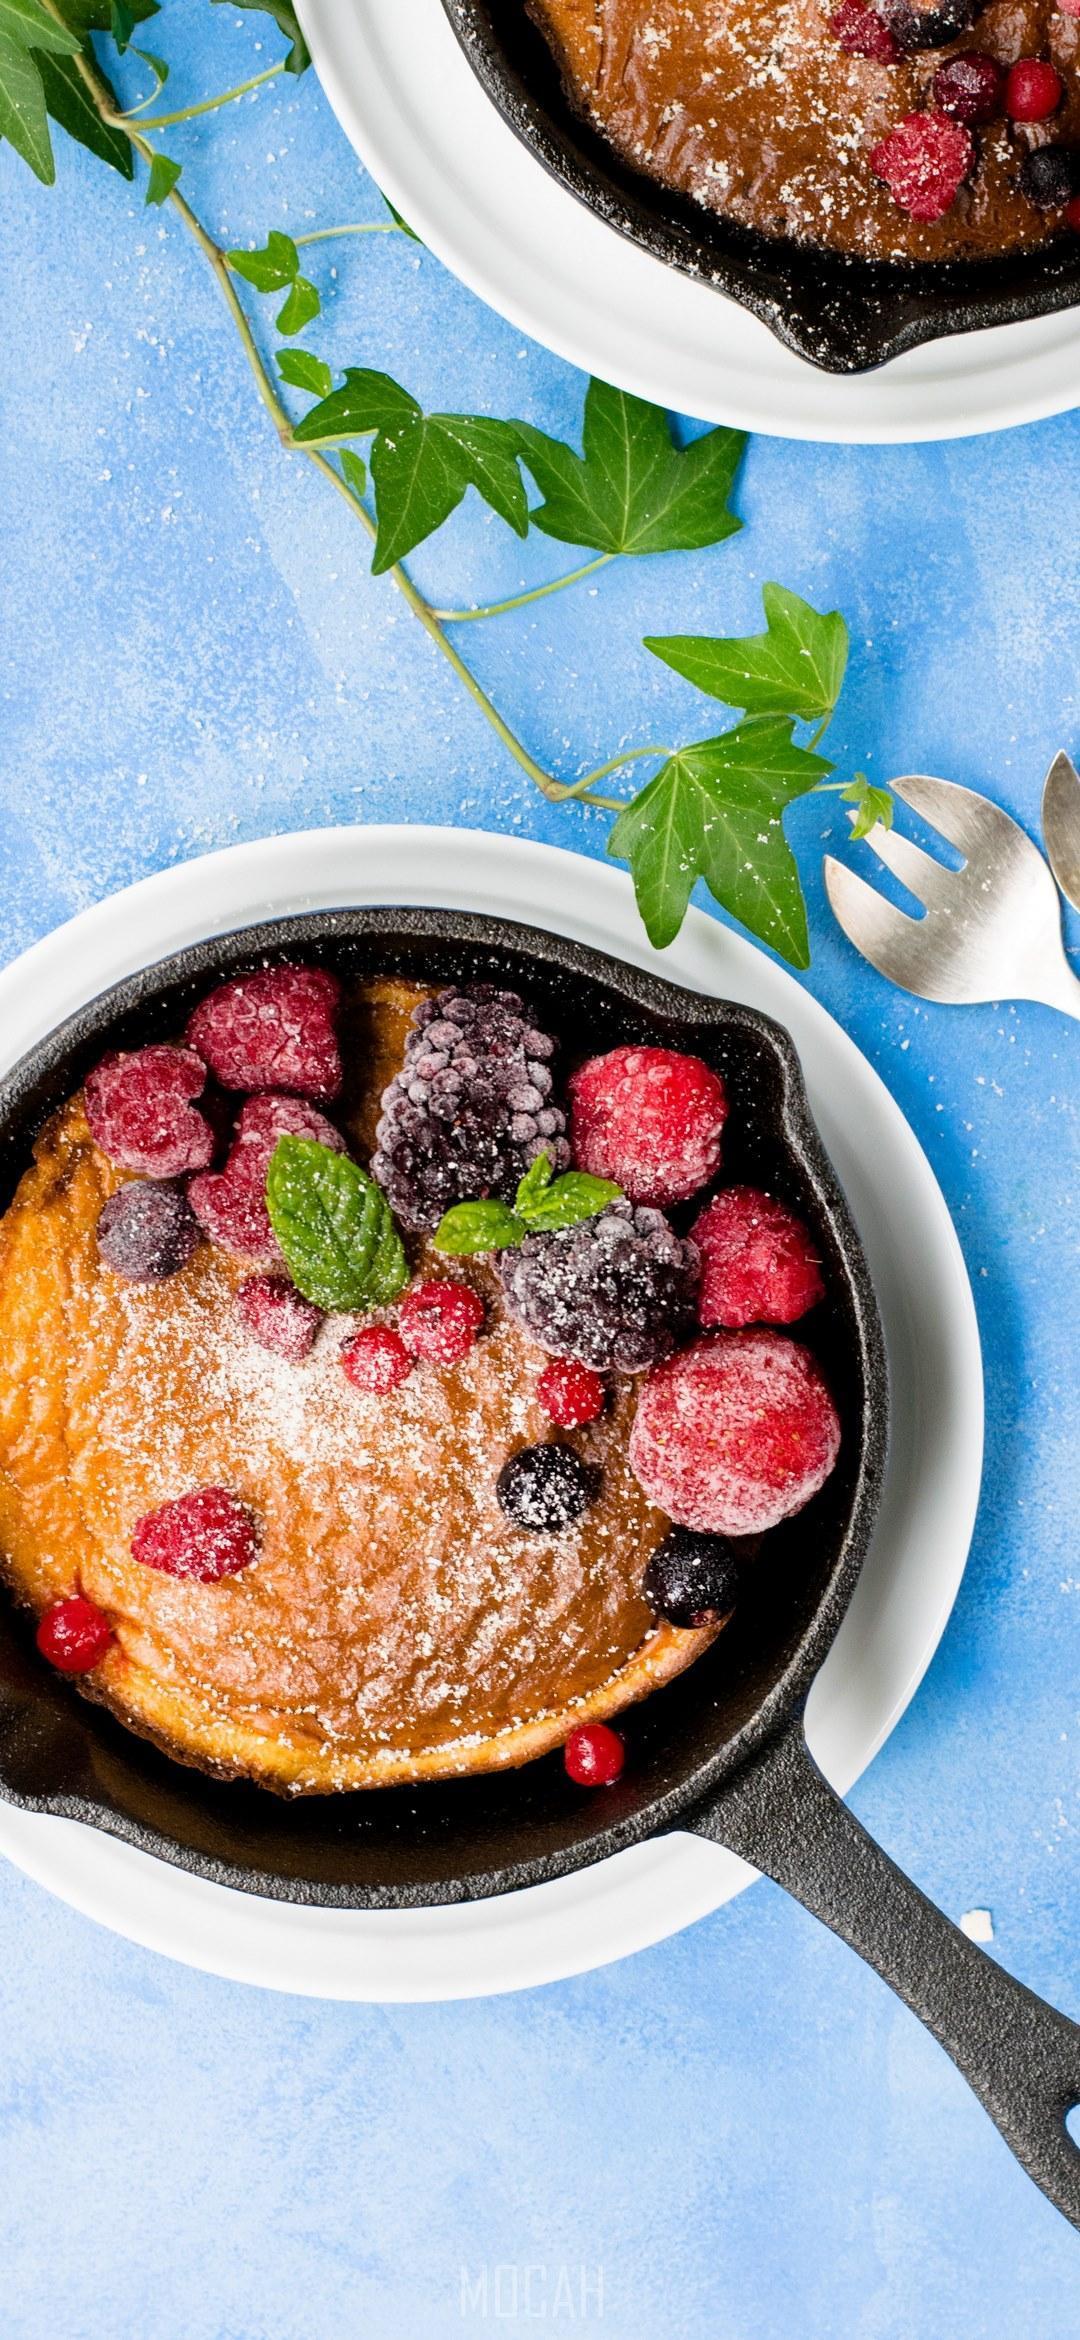 HD wallpaper, Vivo Iqoo Background Hd, 1080X2340, Dutch Baby Pancake, Pancakes In Cast Iron Skillet With Berries And Blue Cloth